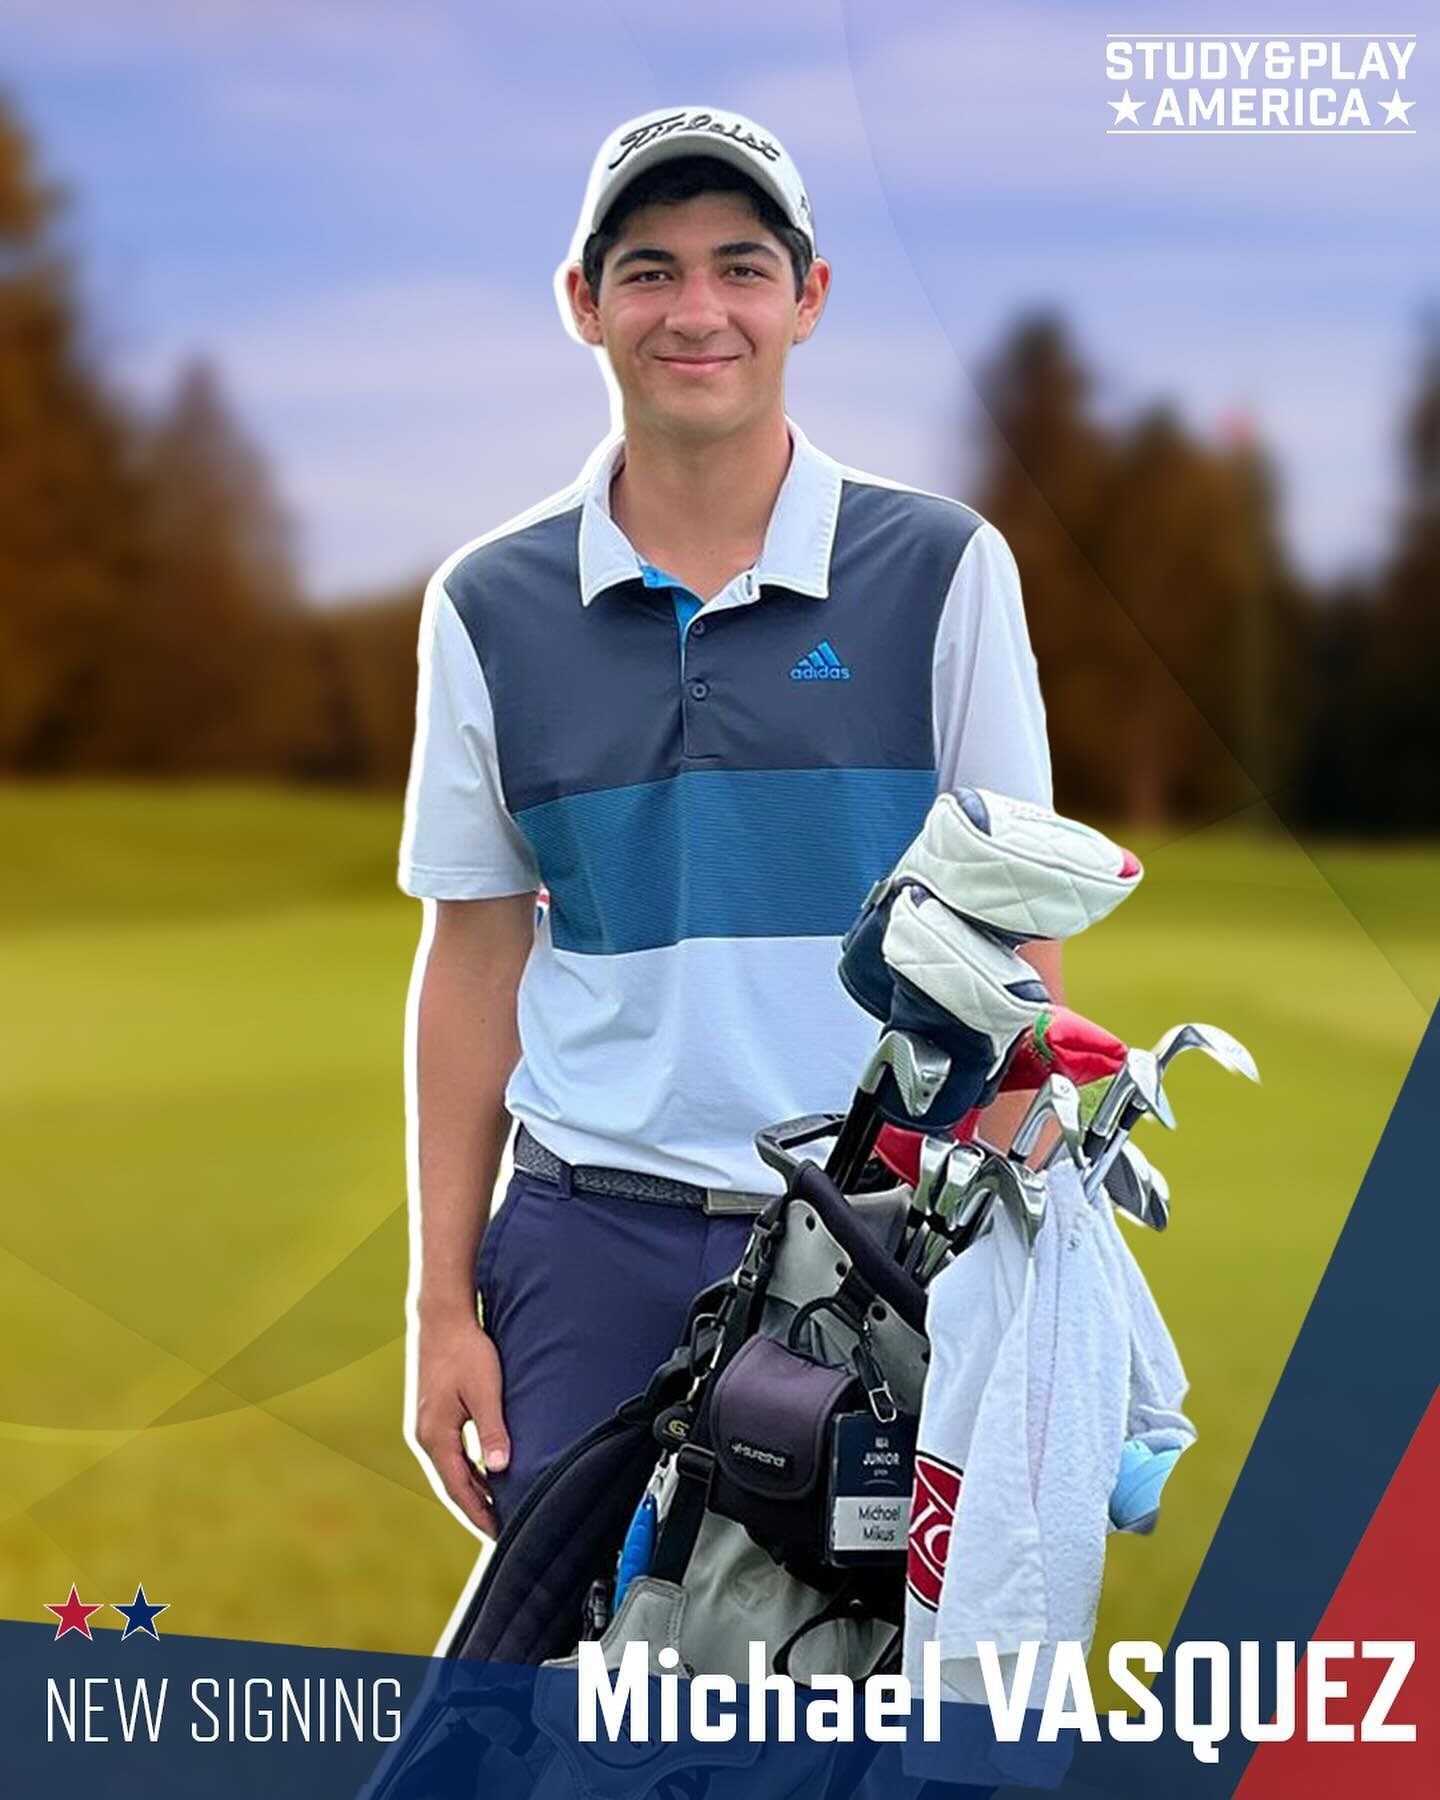 Warm welcome to 2025 recruit @michael_mikus 🇨🇷 We&rsquo;re excited to have you as part of the S&amp;P family 🤝

The @fedegolfcr golfer is a serious talent with a current WAGR ranking of 276 (top 50 U18&rsquo;s) 🤩

Tiempos emocionantes por delante